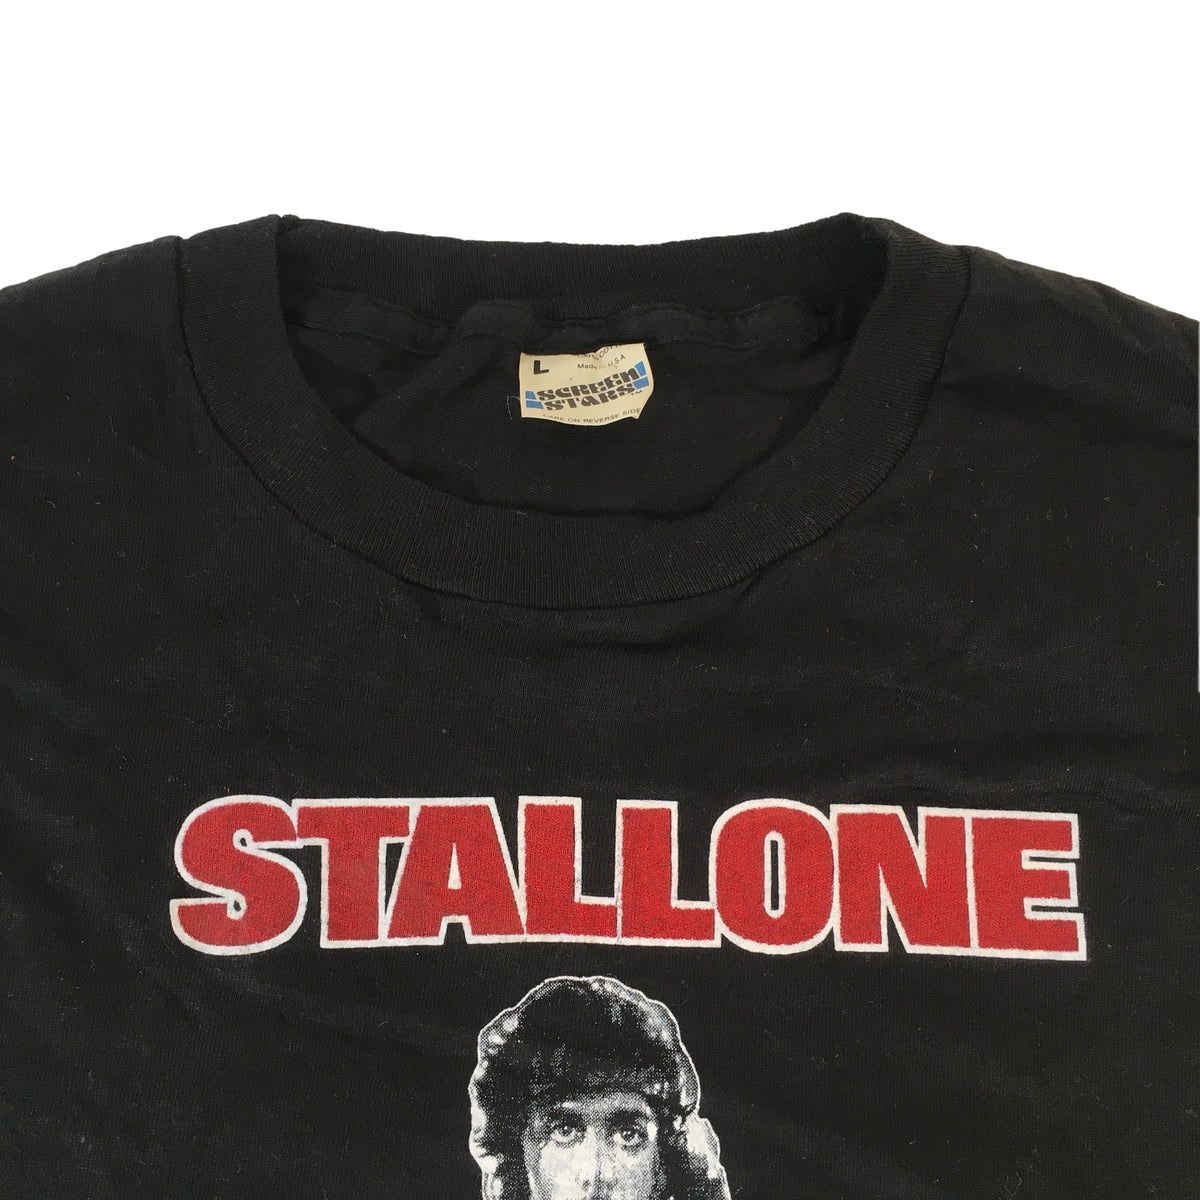 Vintage First Blood &quot;Stallone&quot; Sleeveless T-Shirt - jointcustodydc